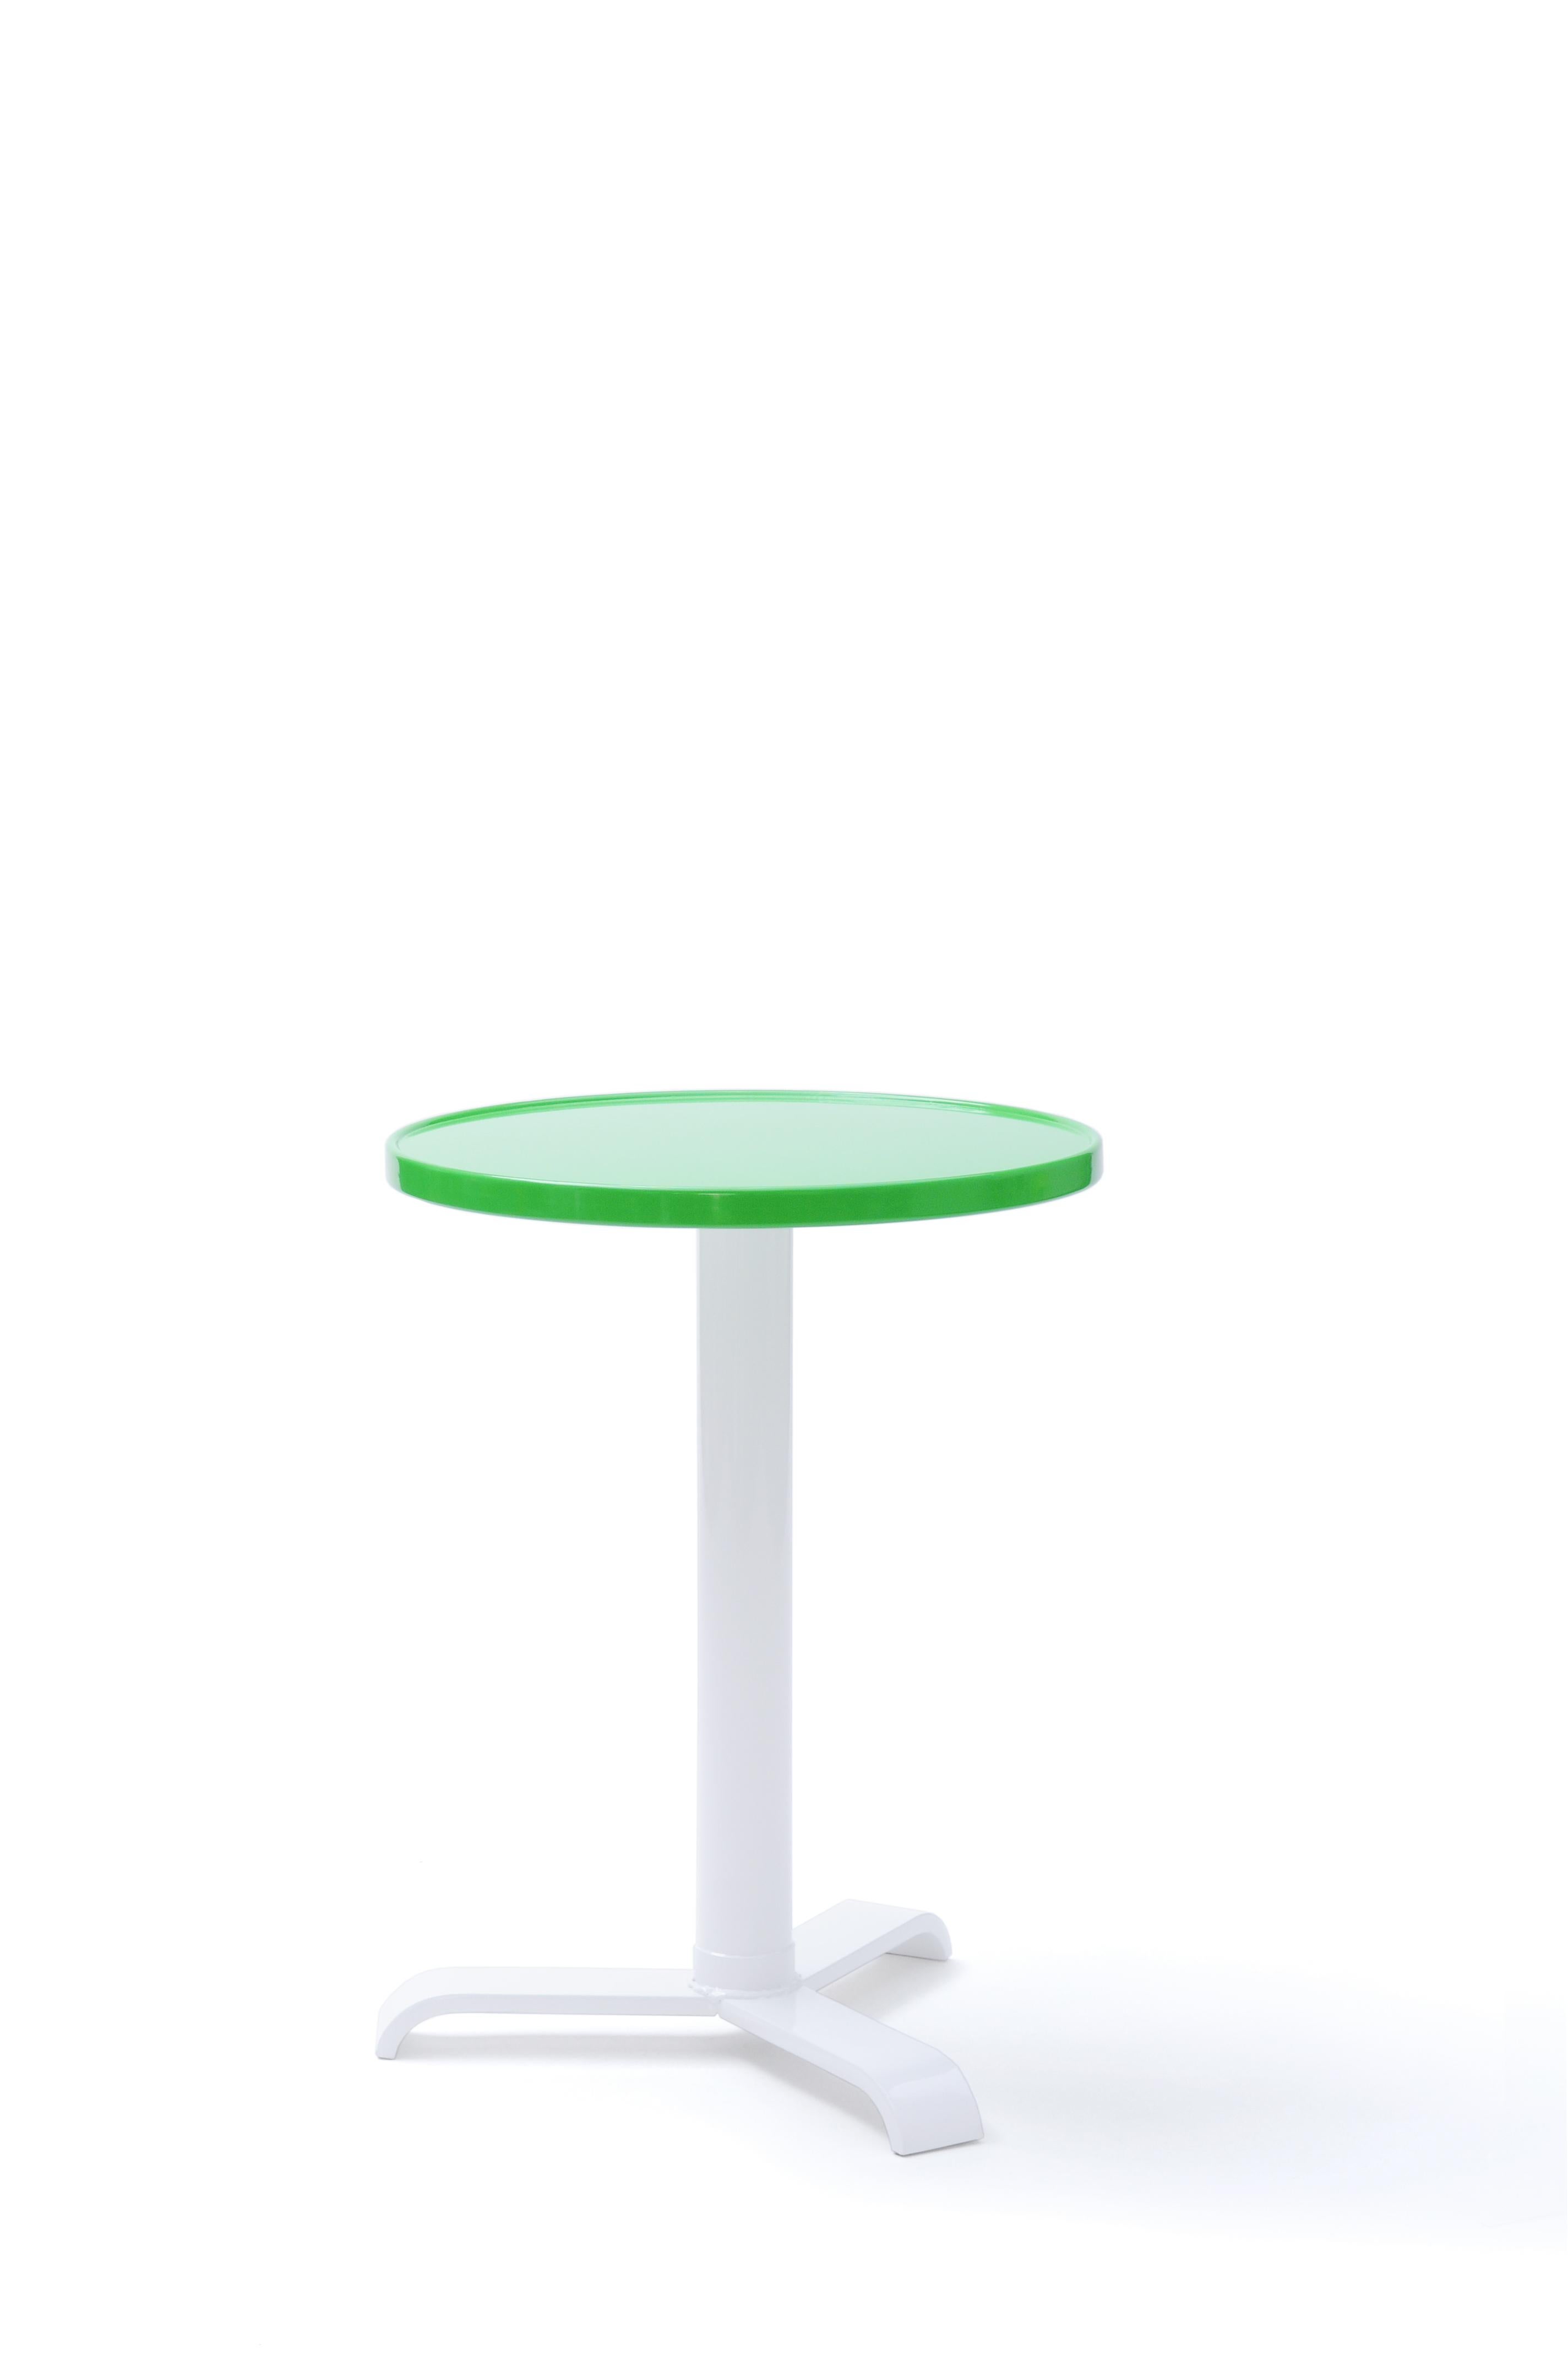 For Sale: White (Blanc) Gueridon 77 Small Round Pedestal Table in Essential Colors by Tolix 2